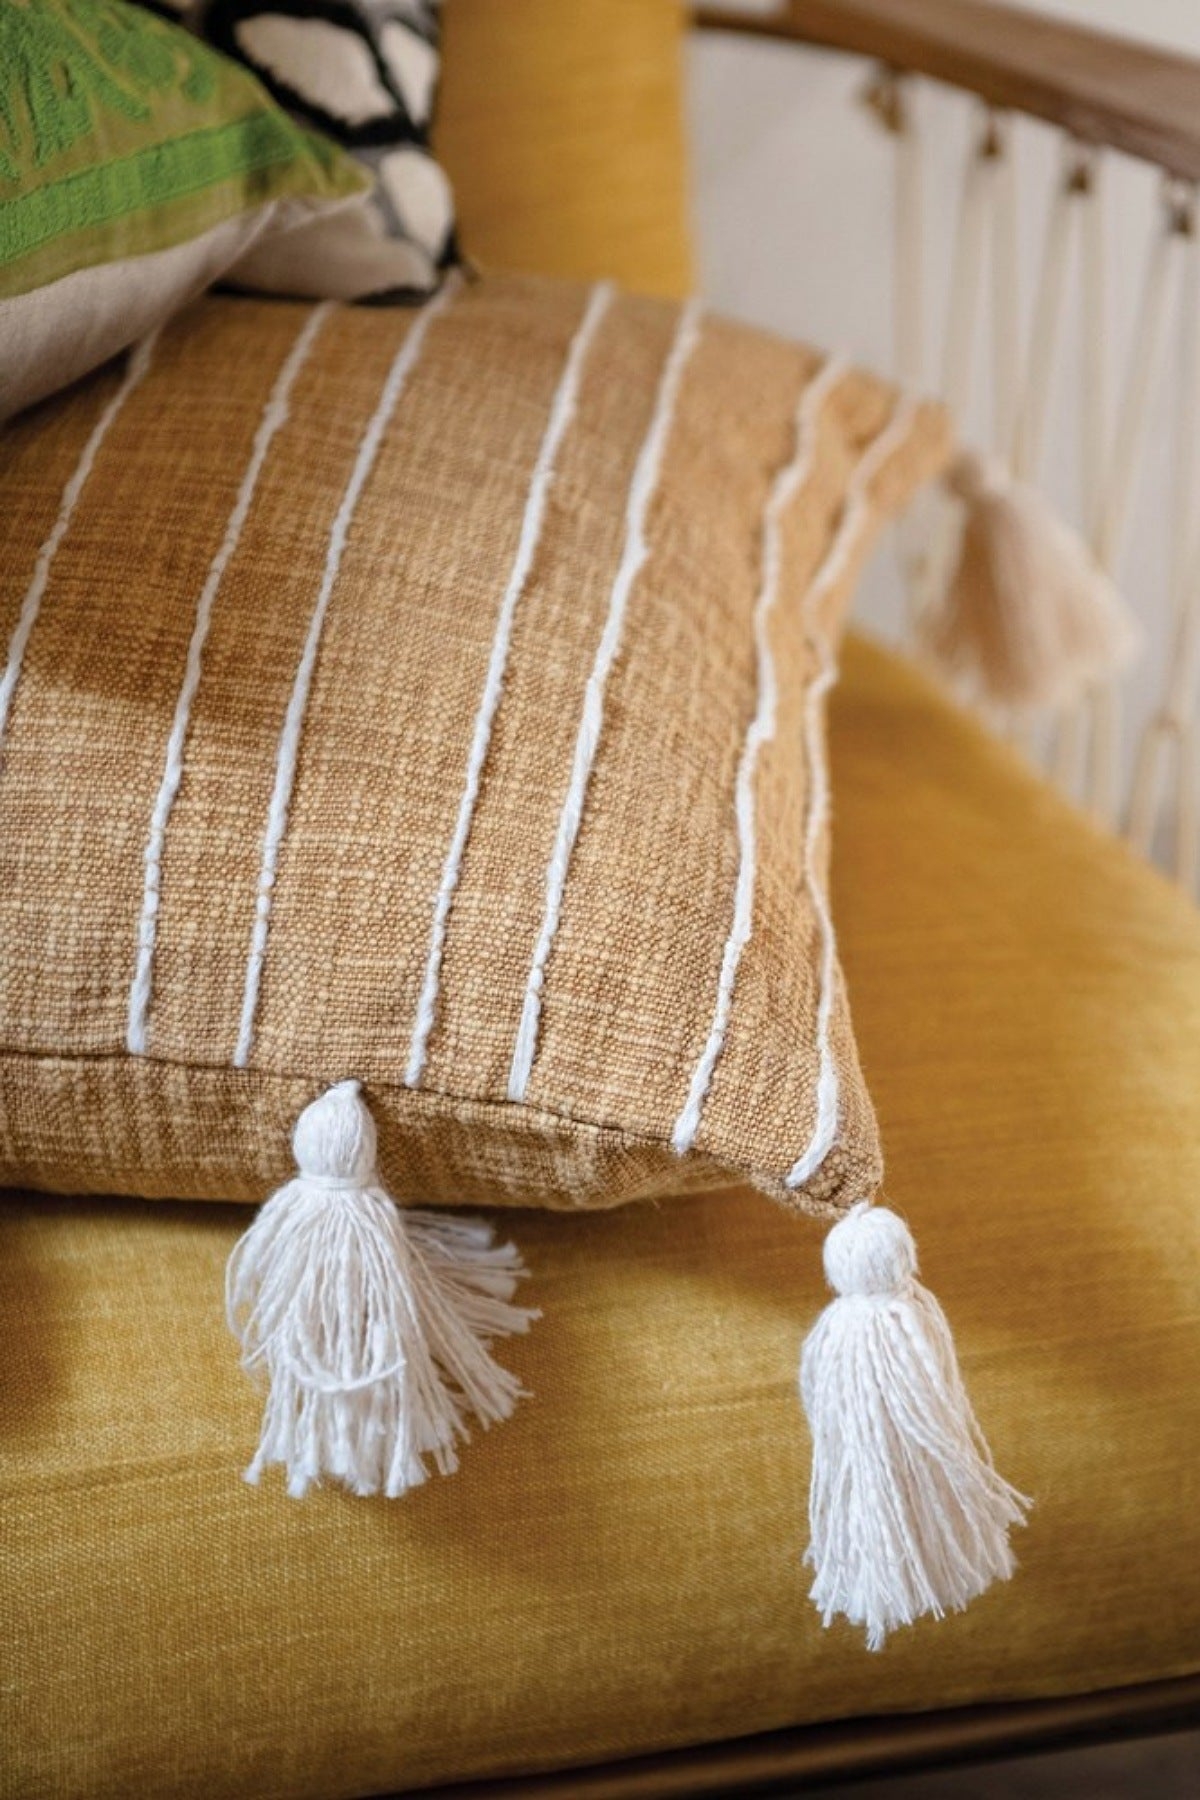 Cotton Woven Pillow with Appliqued Stripes & Tassels, Mustard Color & White - Image 2